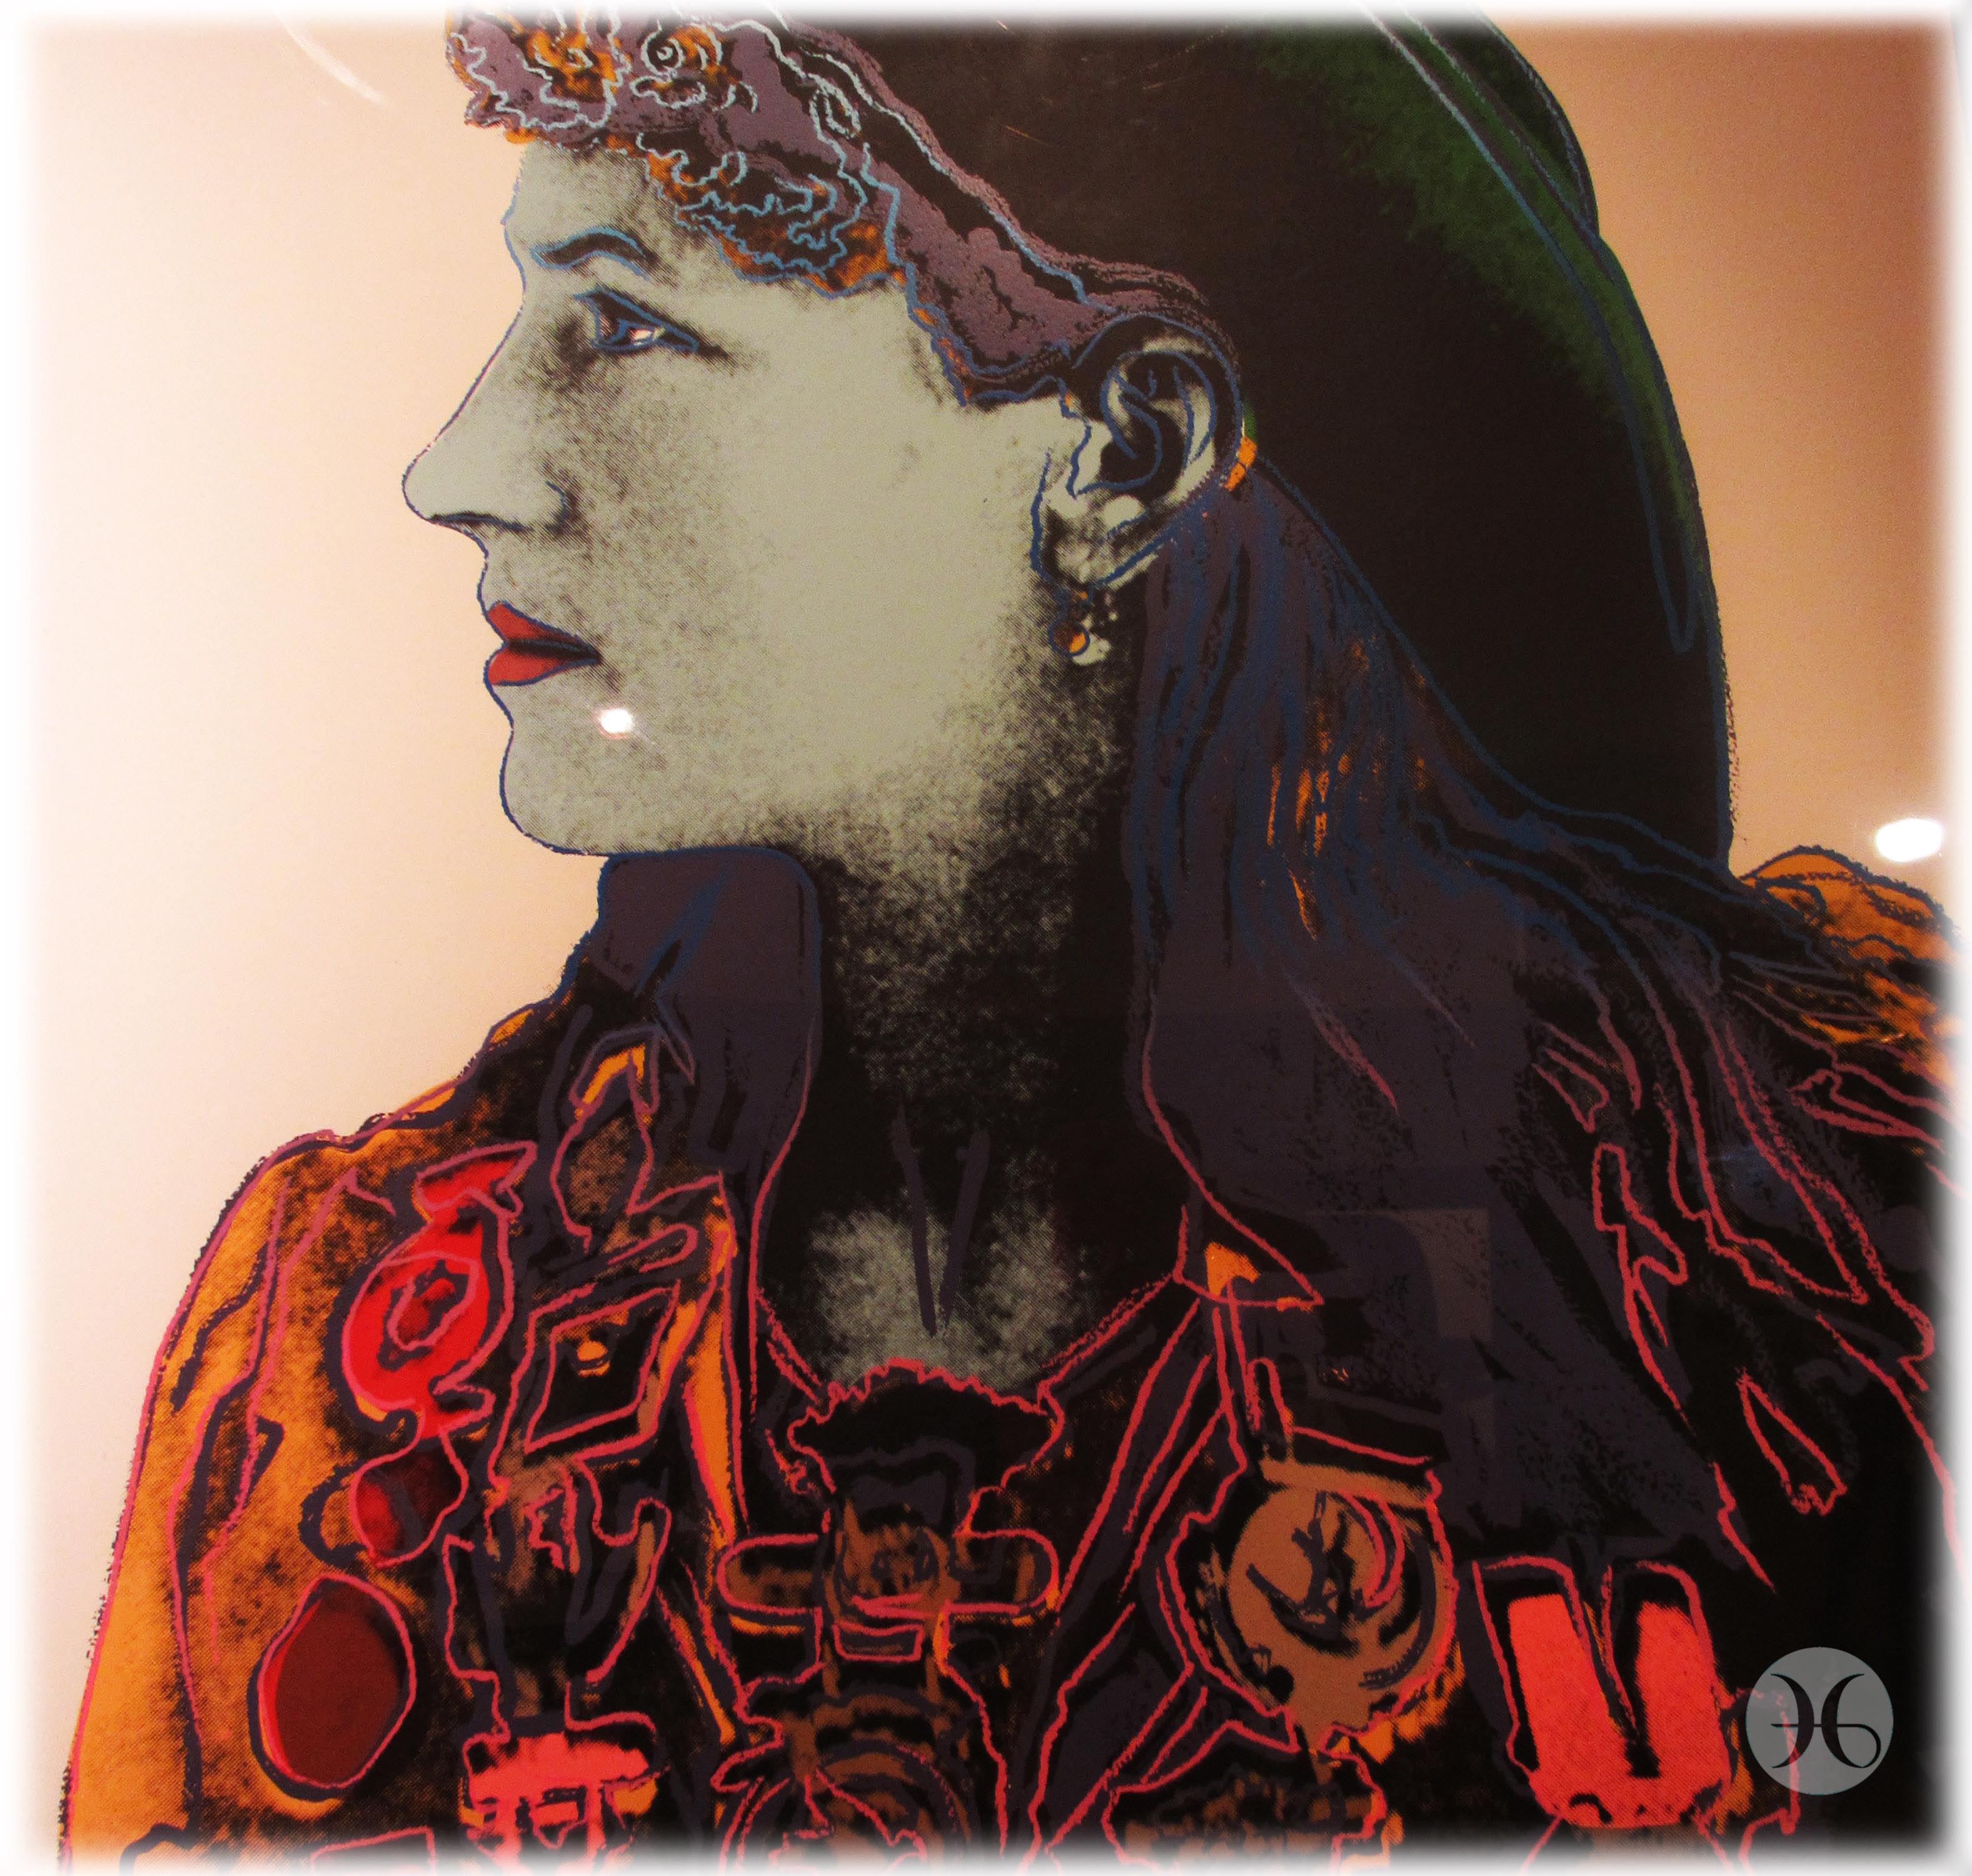 Annie Oakley, from "Cowboys and Indians", Andy Warhol